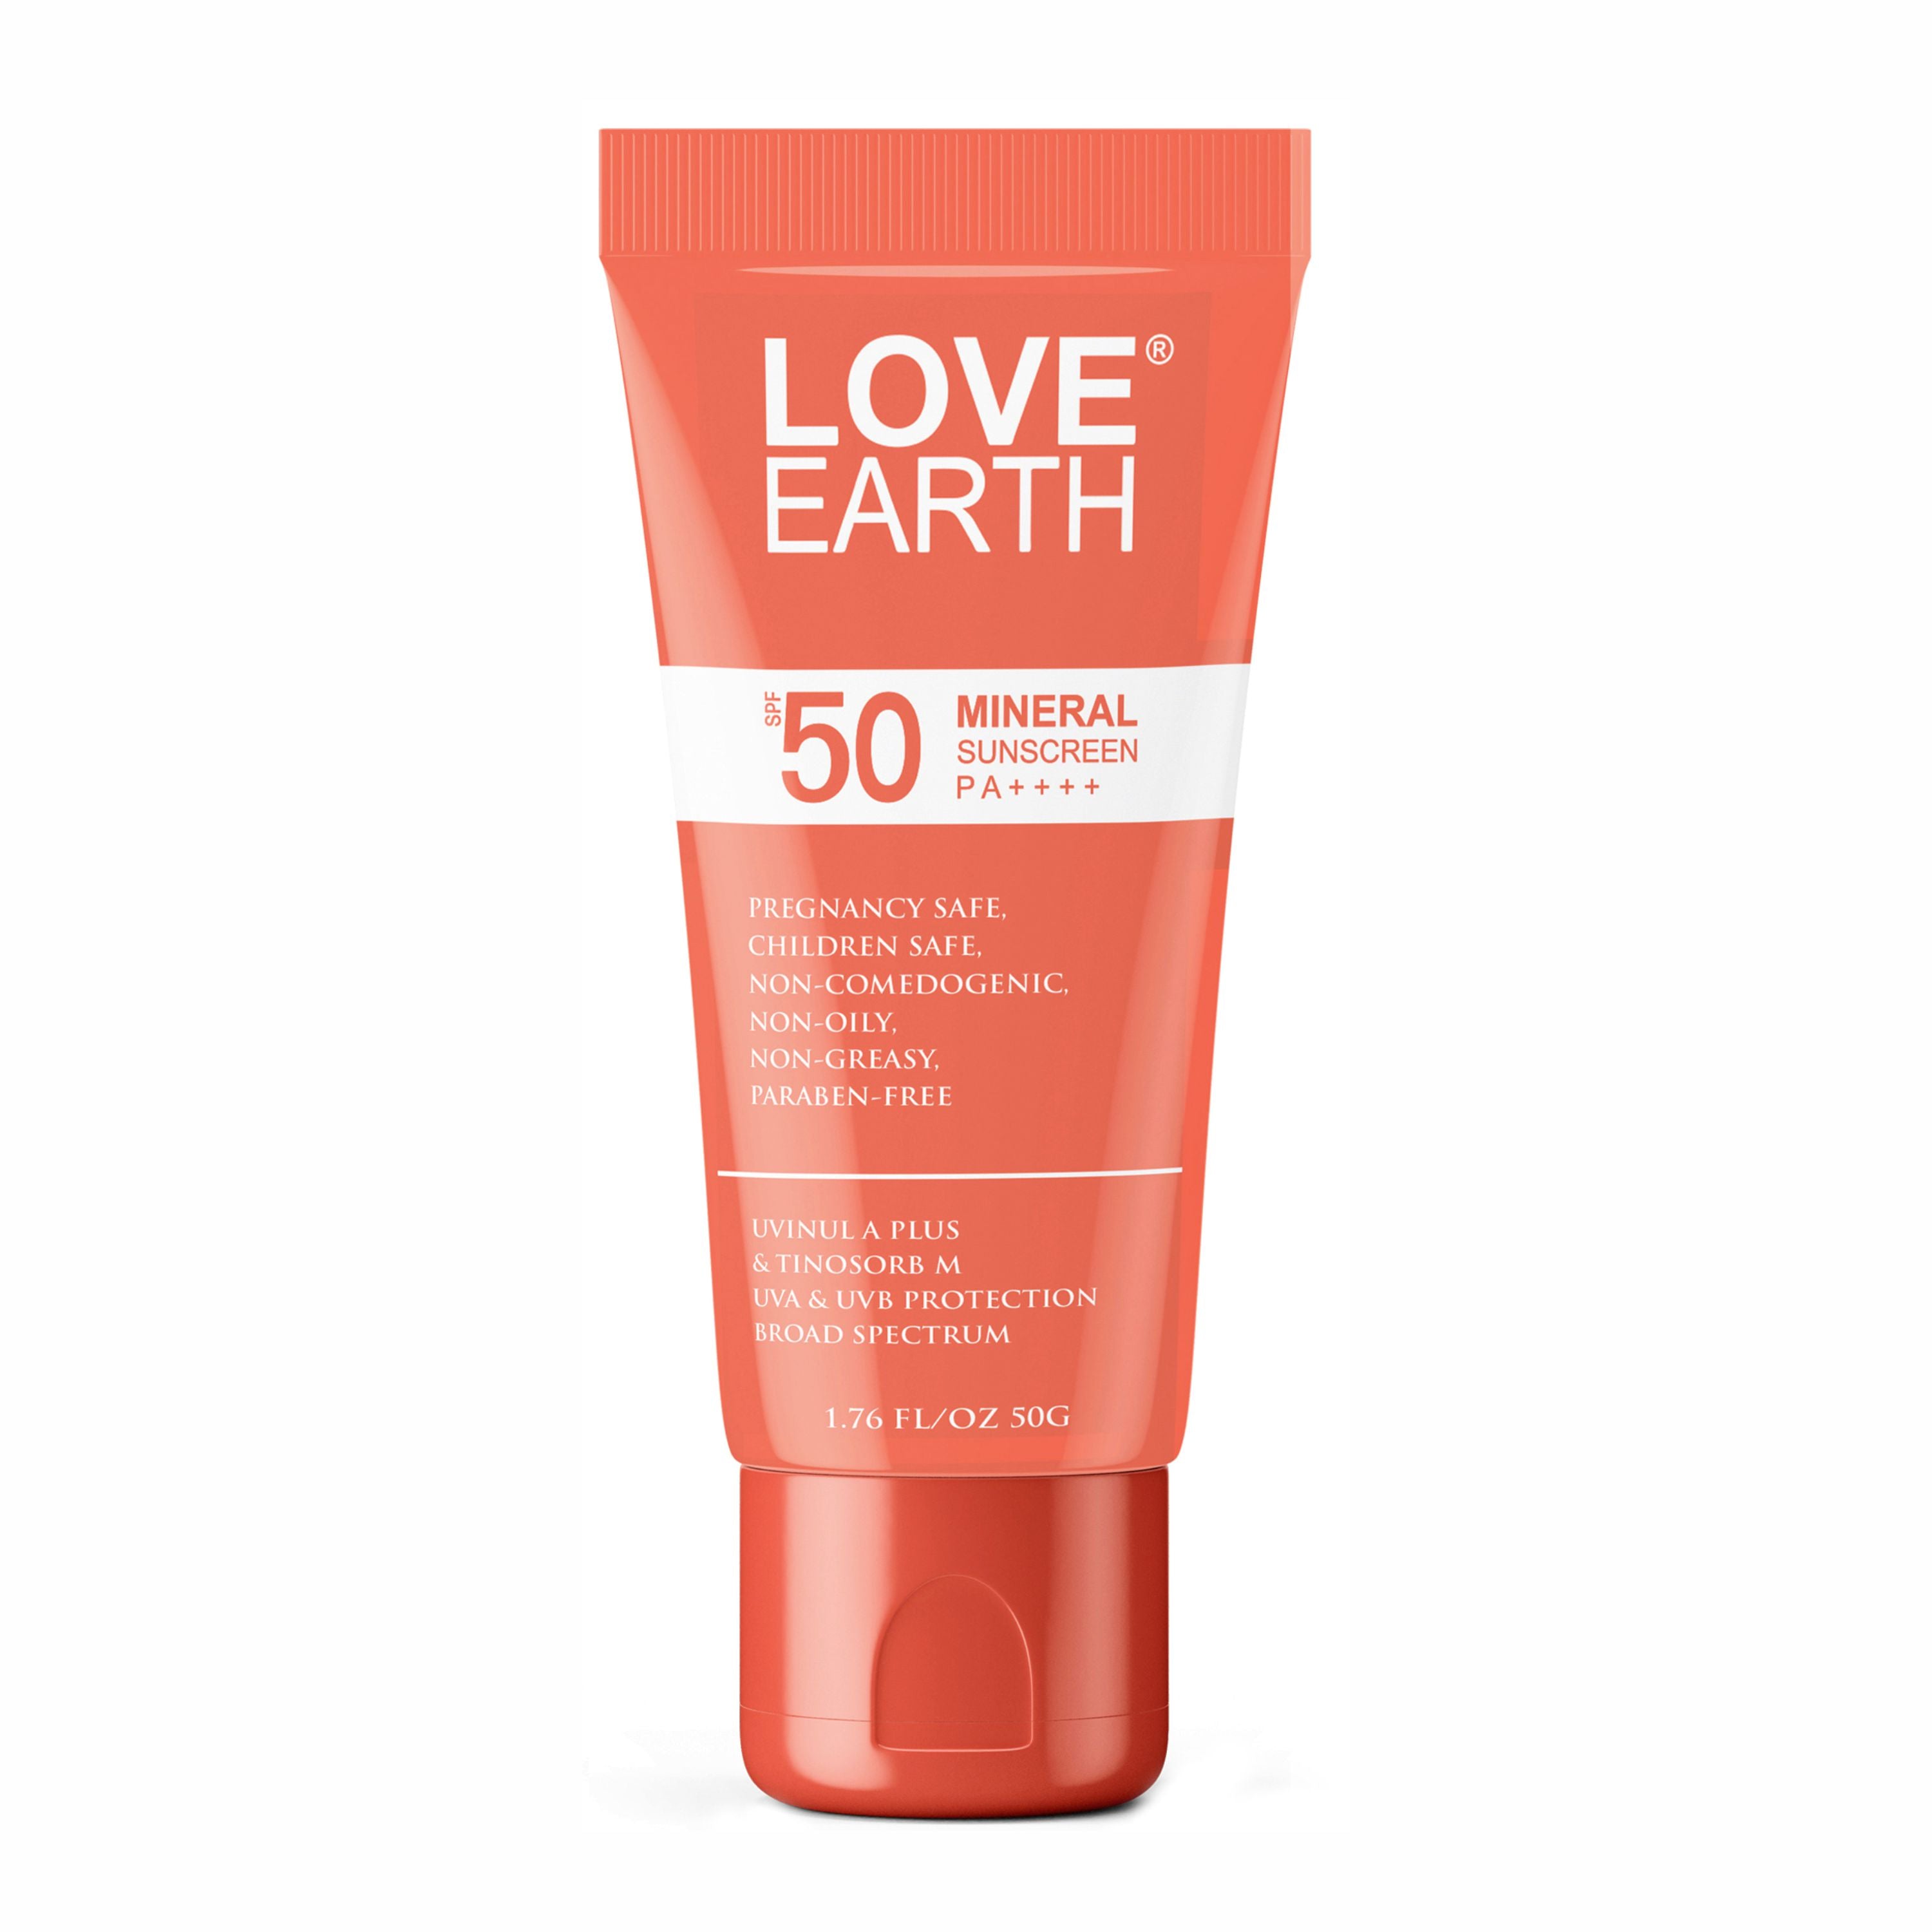 Mineral Sunscreen SPF 50 PA++++|No White Cast | UV Protection| Non-Oily| Non-Greasy| Paraben-Free| All Skin Types | For Women & Men | 50G